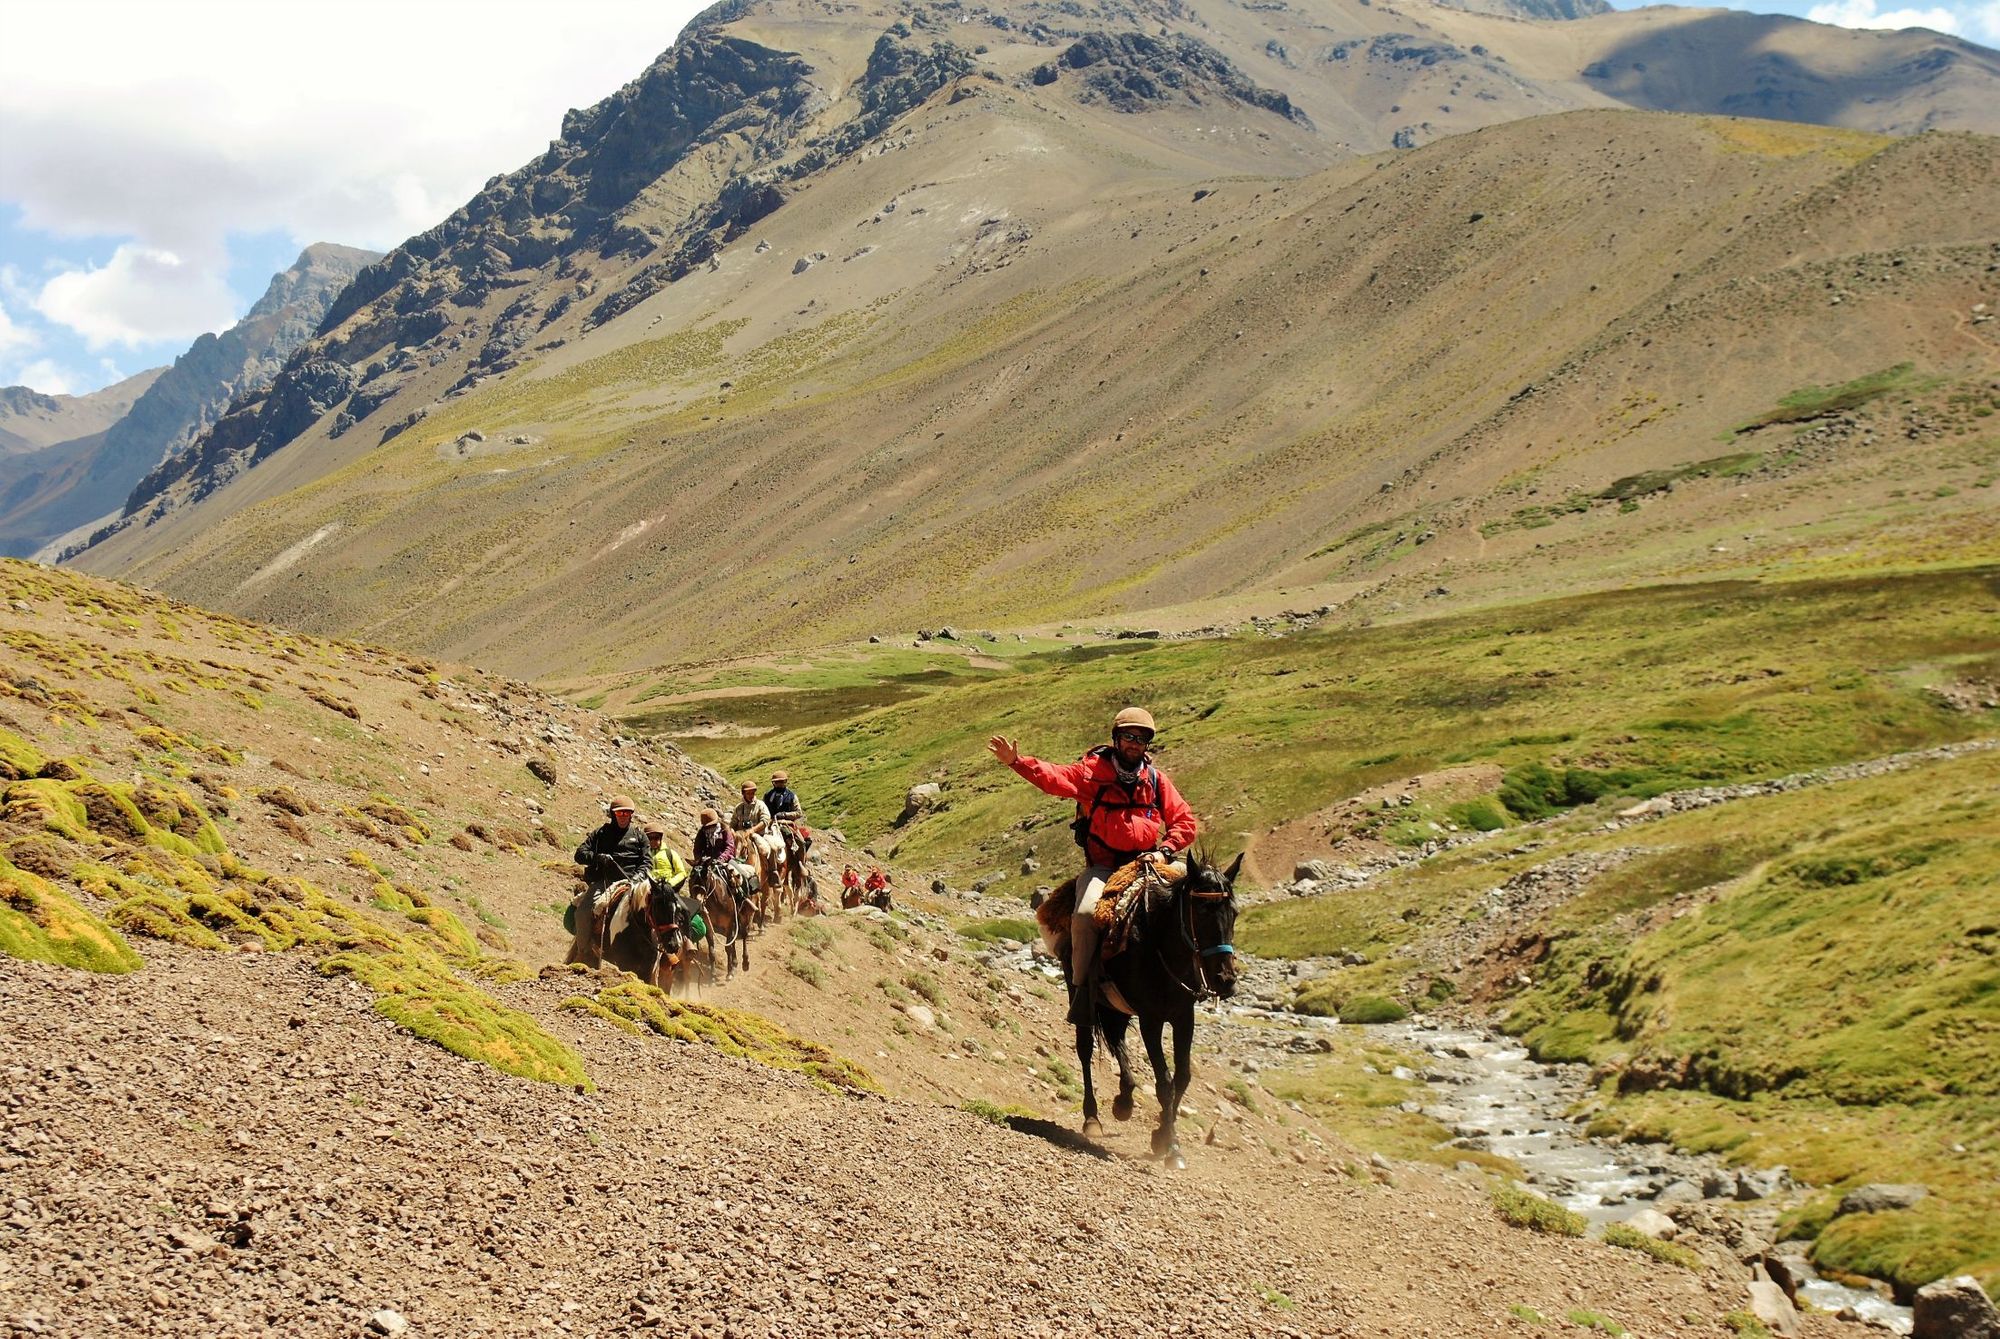 Horsemen crossing the Andes, carrying gear.